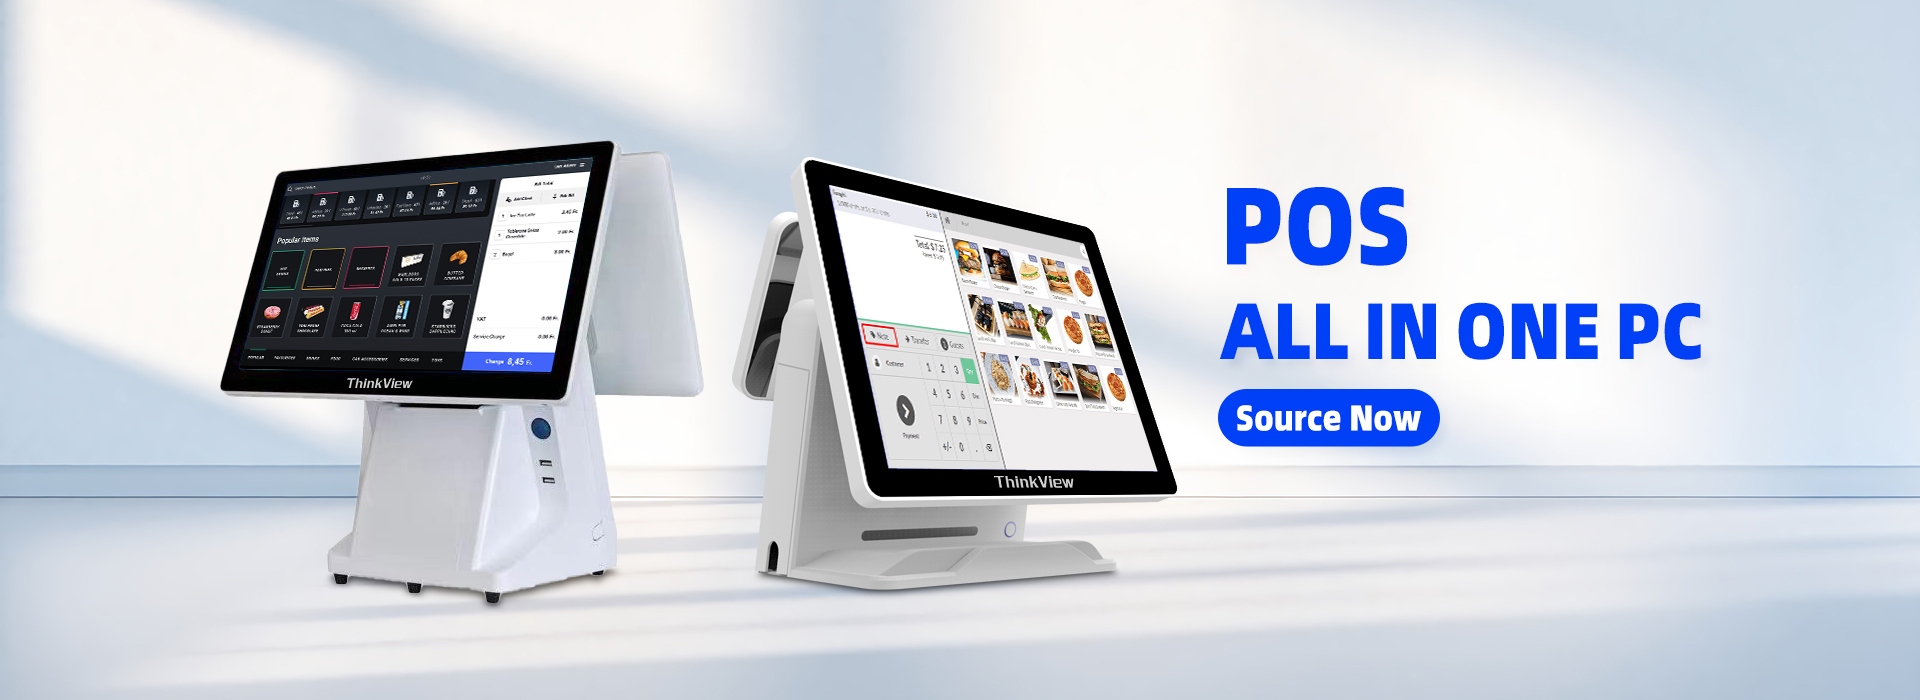 POS all in one PC